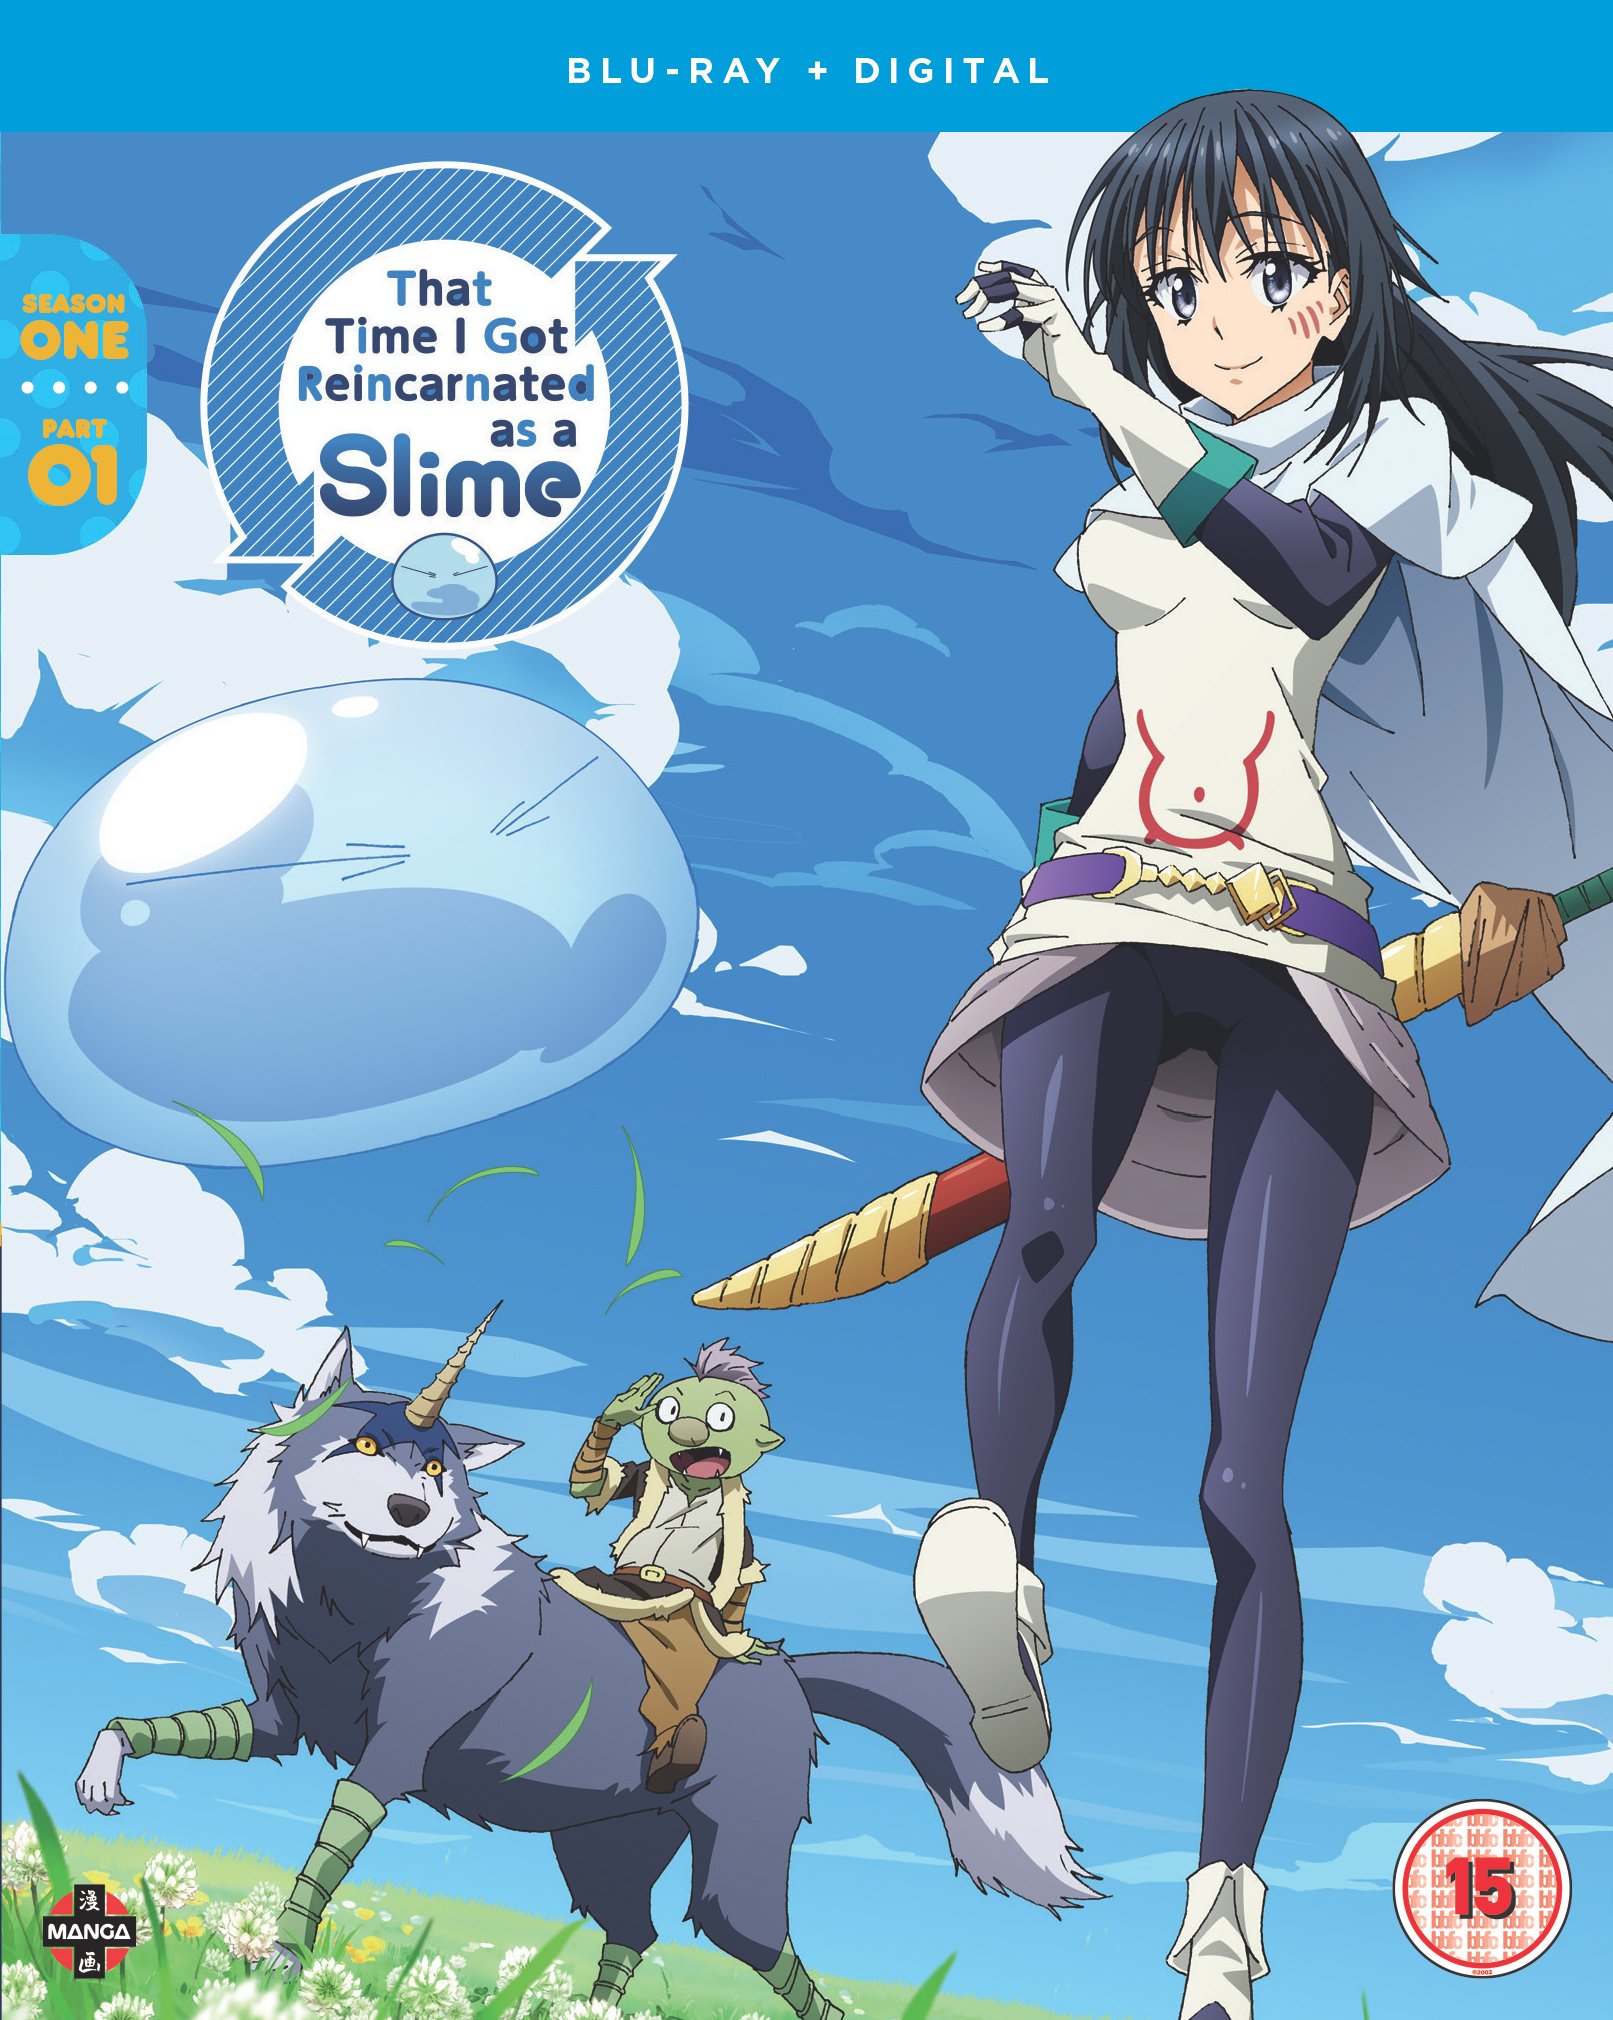 That time i got reincarnated as a slime episode 1 english sub